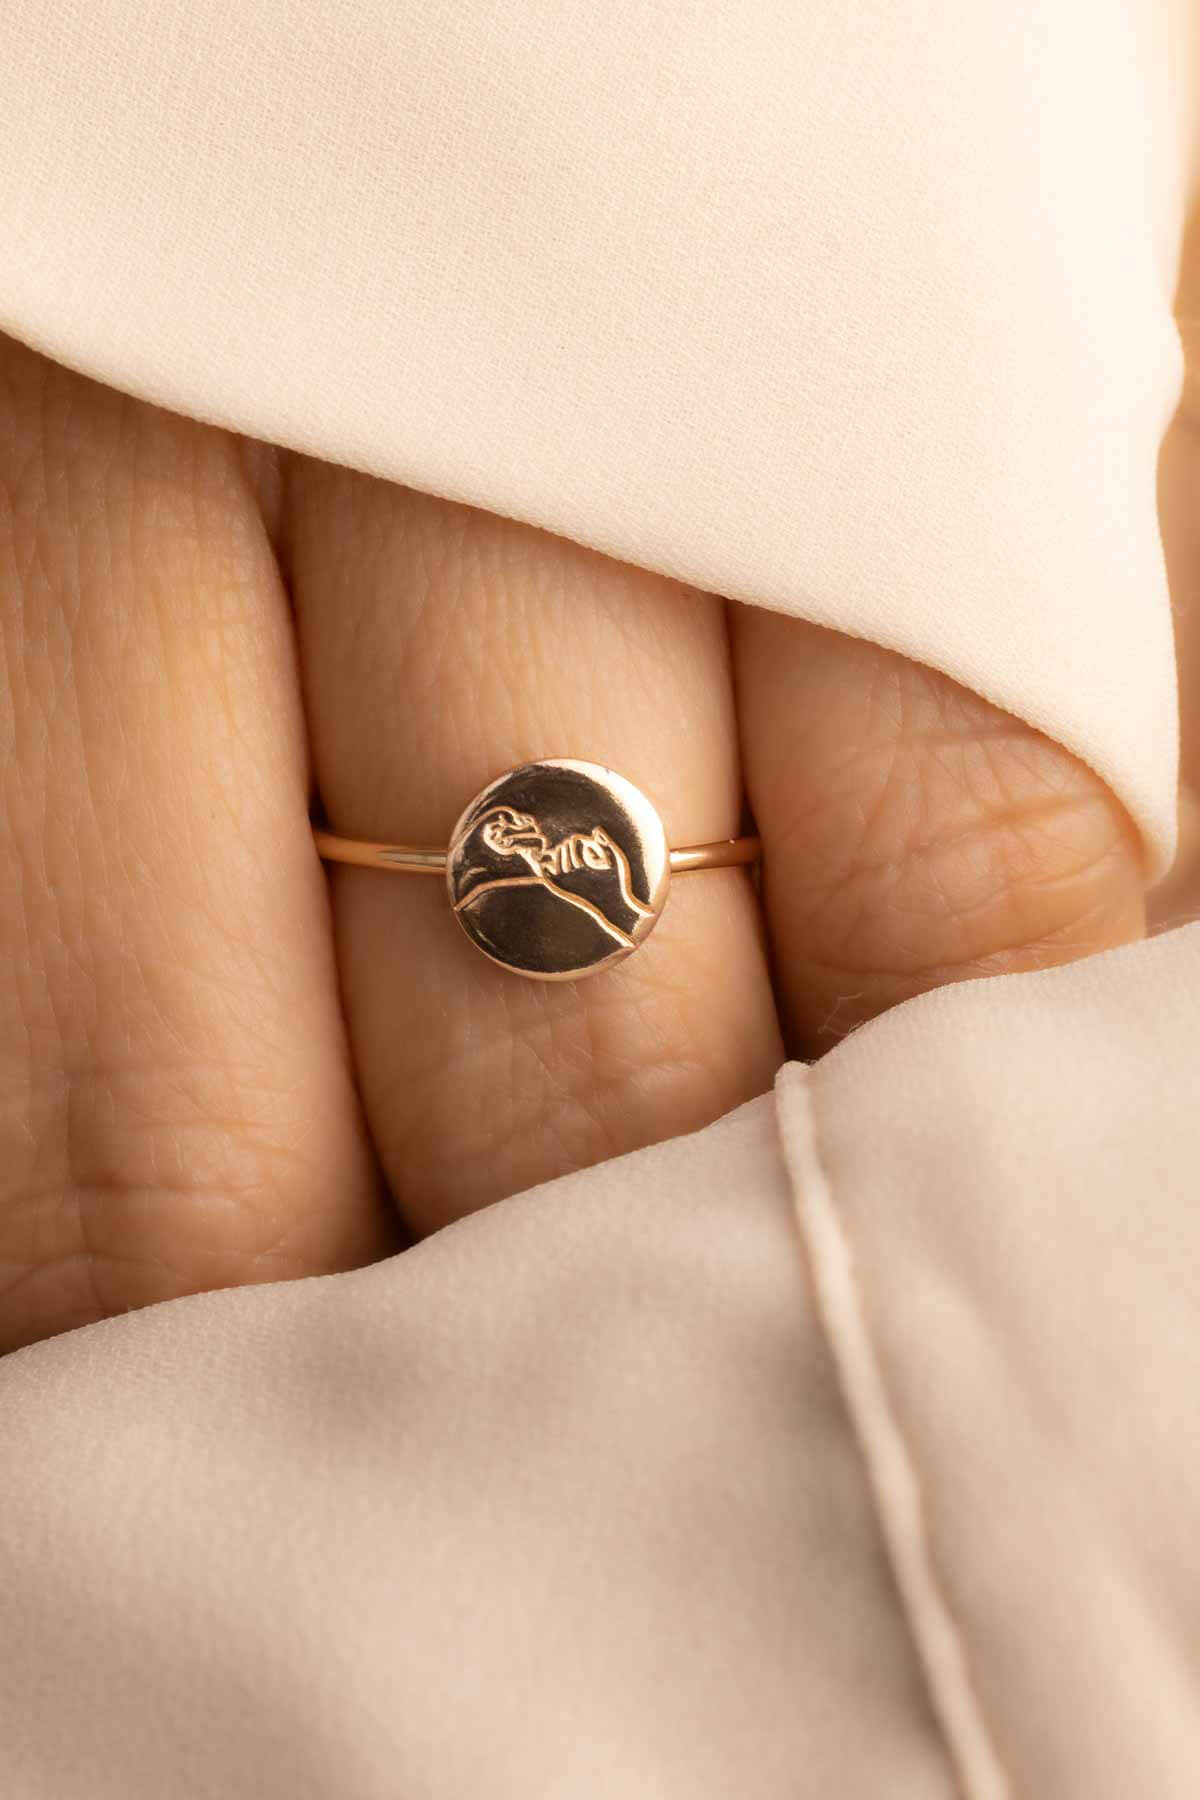 Engraved pinky promise rings for him and her 💖 #thingstodowithyourboy... |  TikTok